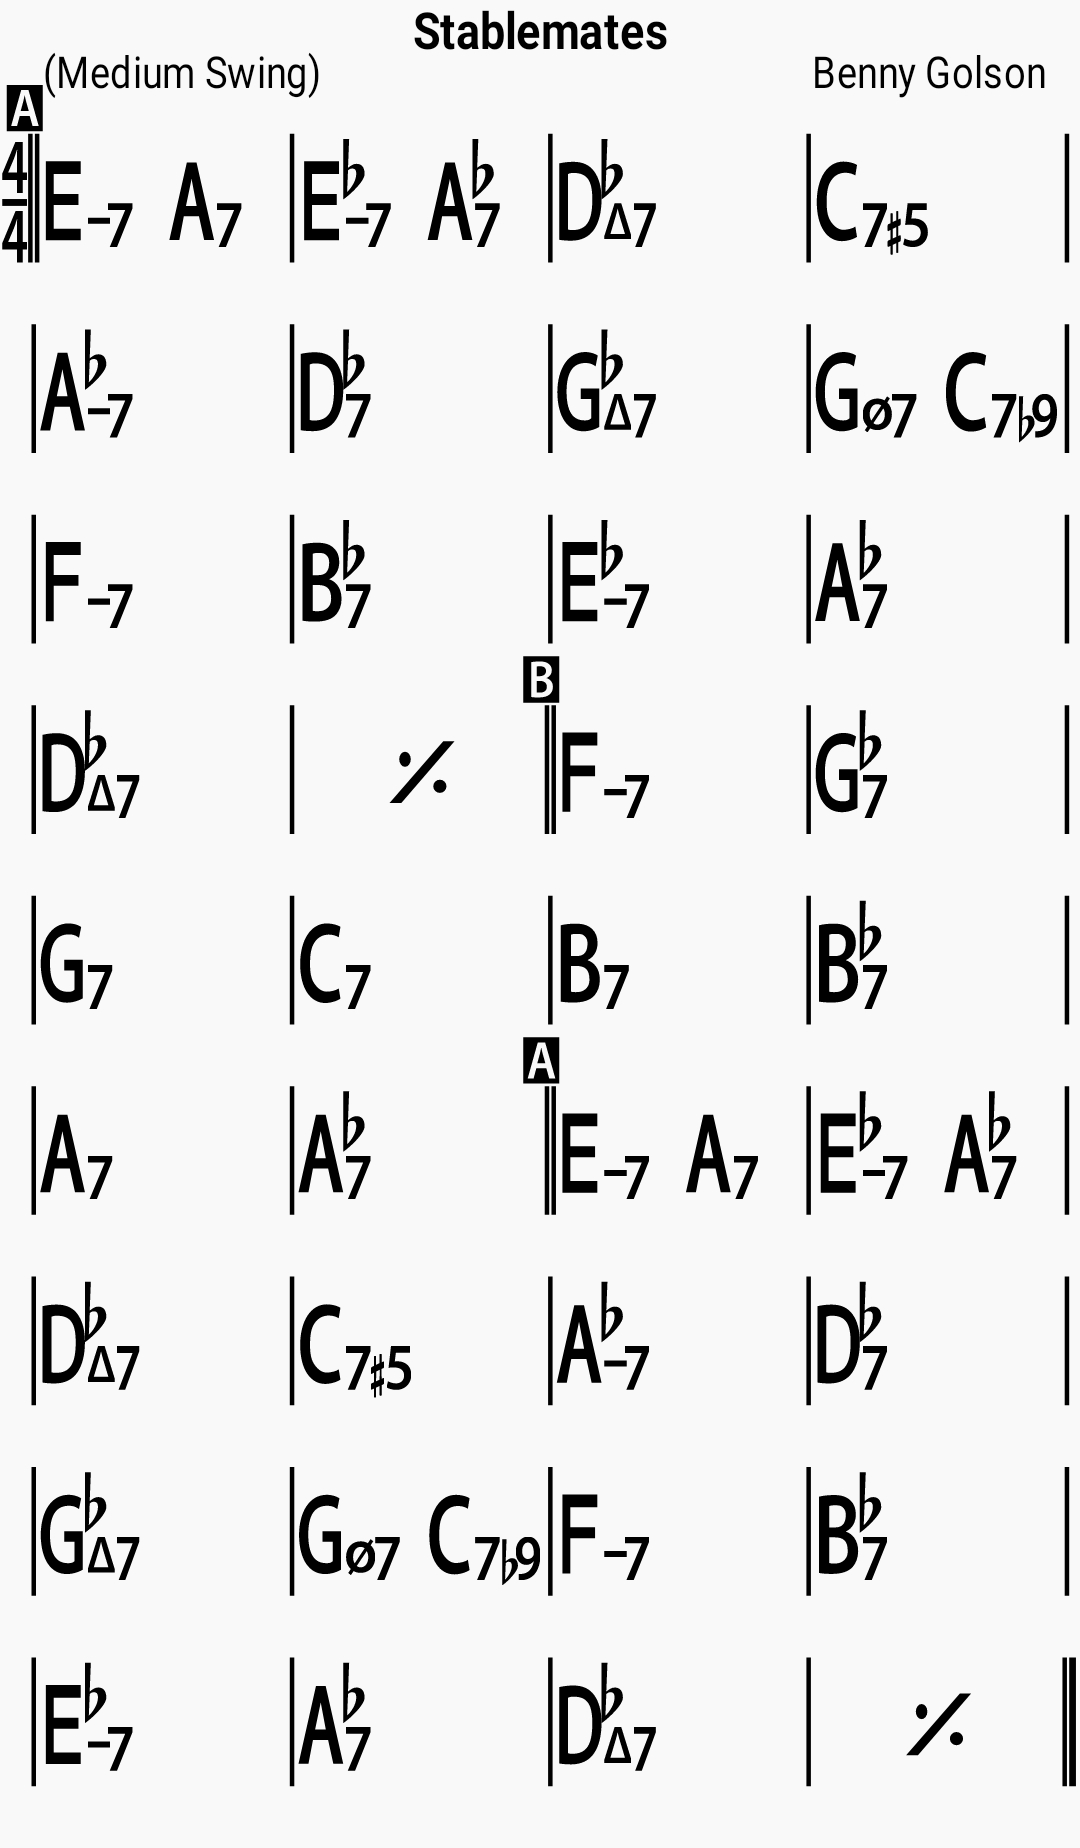 Chord chart for the jazz standard Stablemates